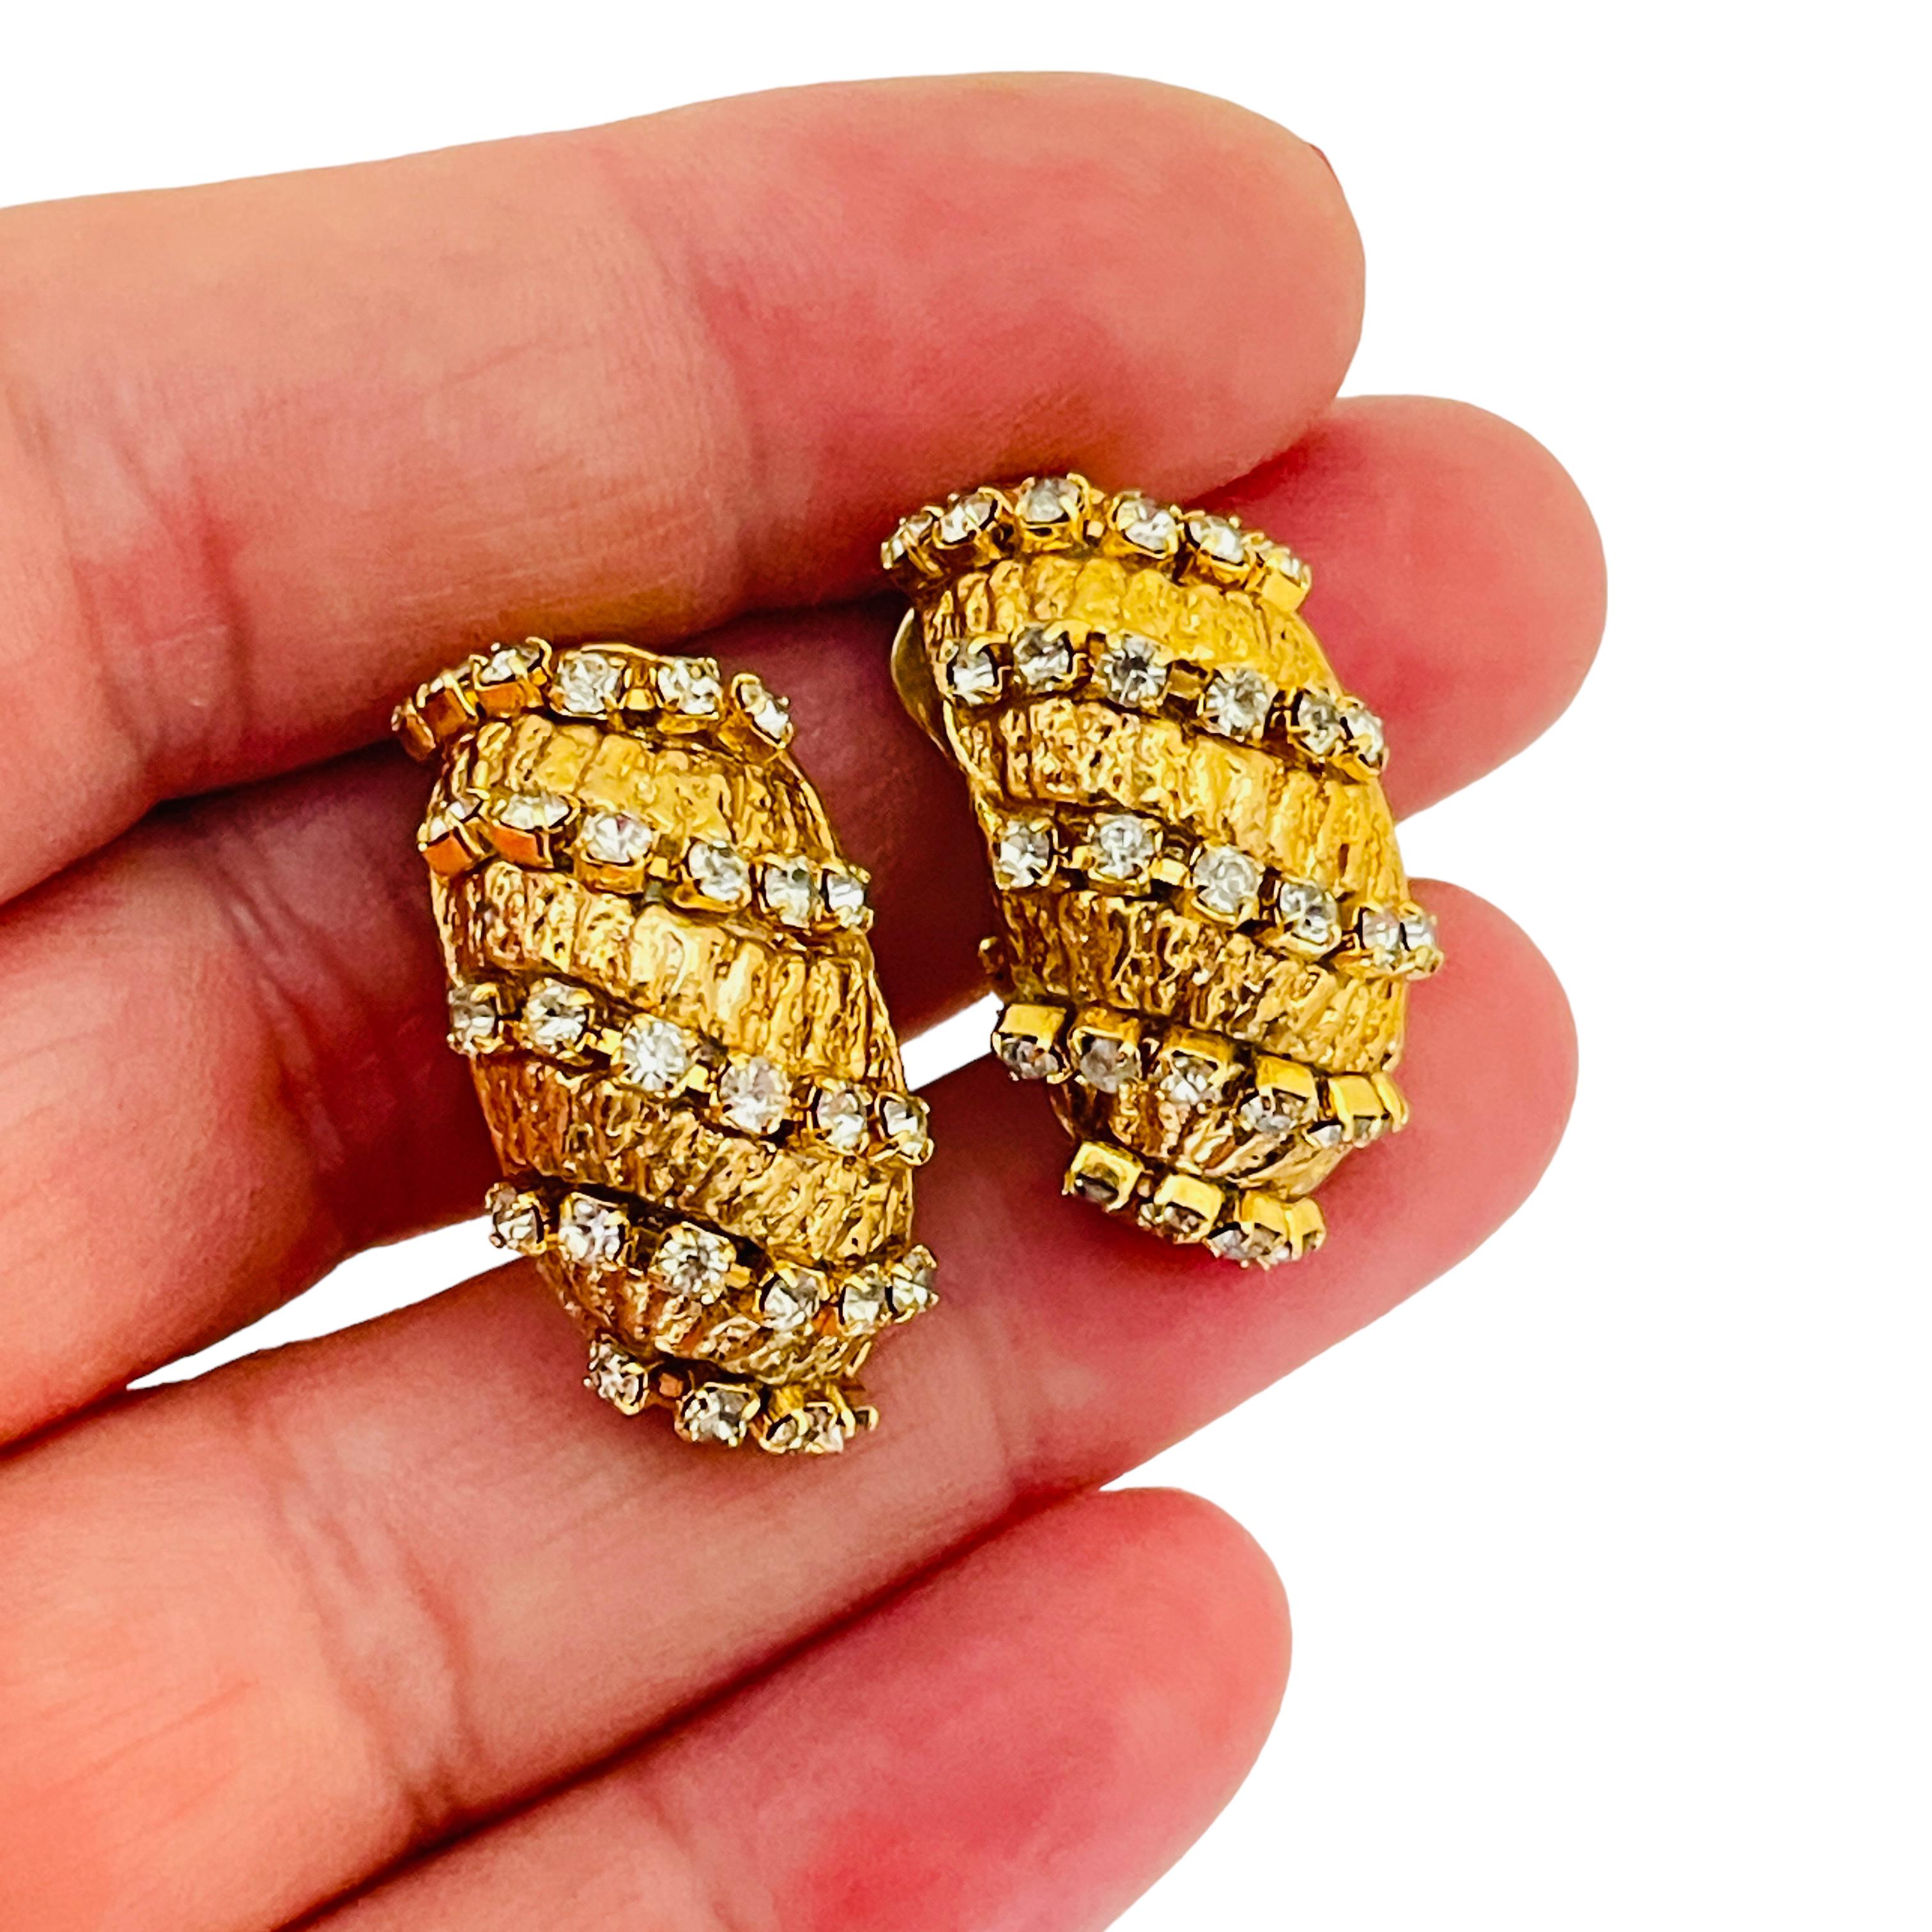 Vintage gold rhinestone clip on 80’s earrings   In Excellent Condition For Sale In Palos Hills, IL